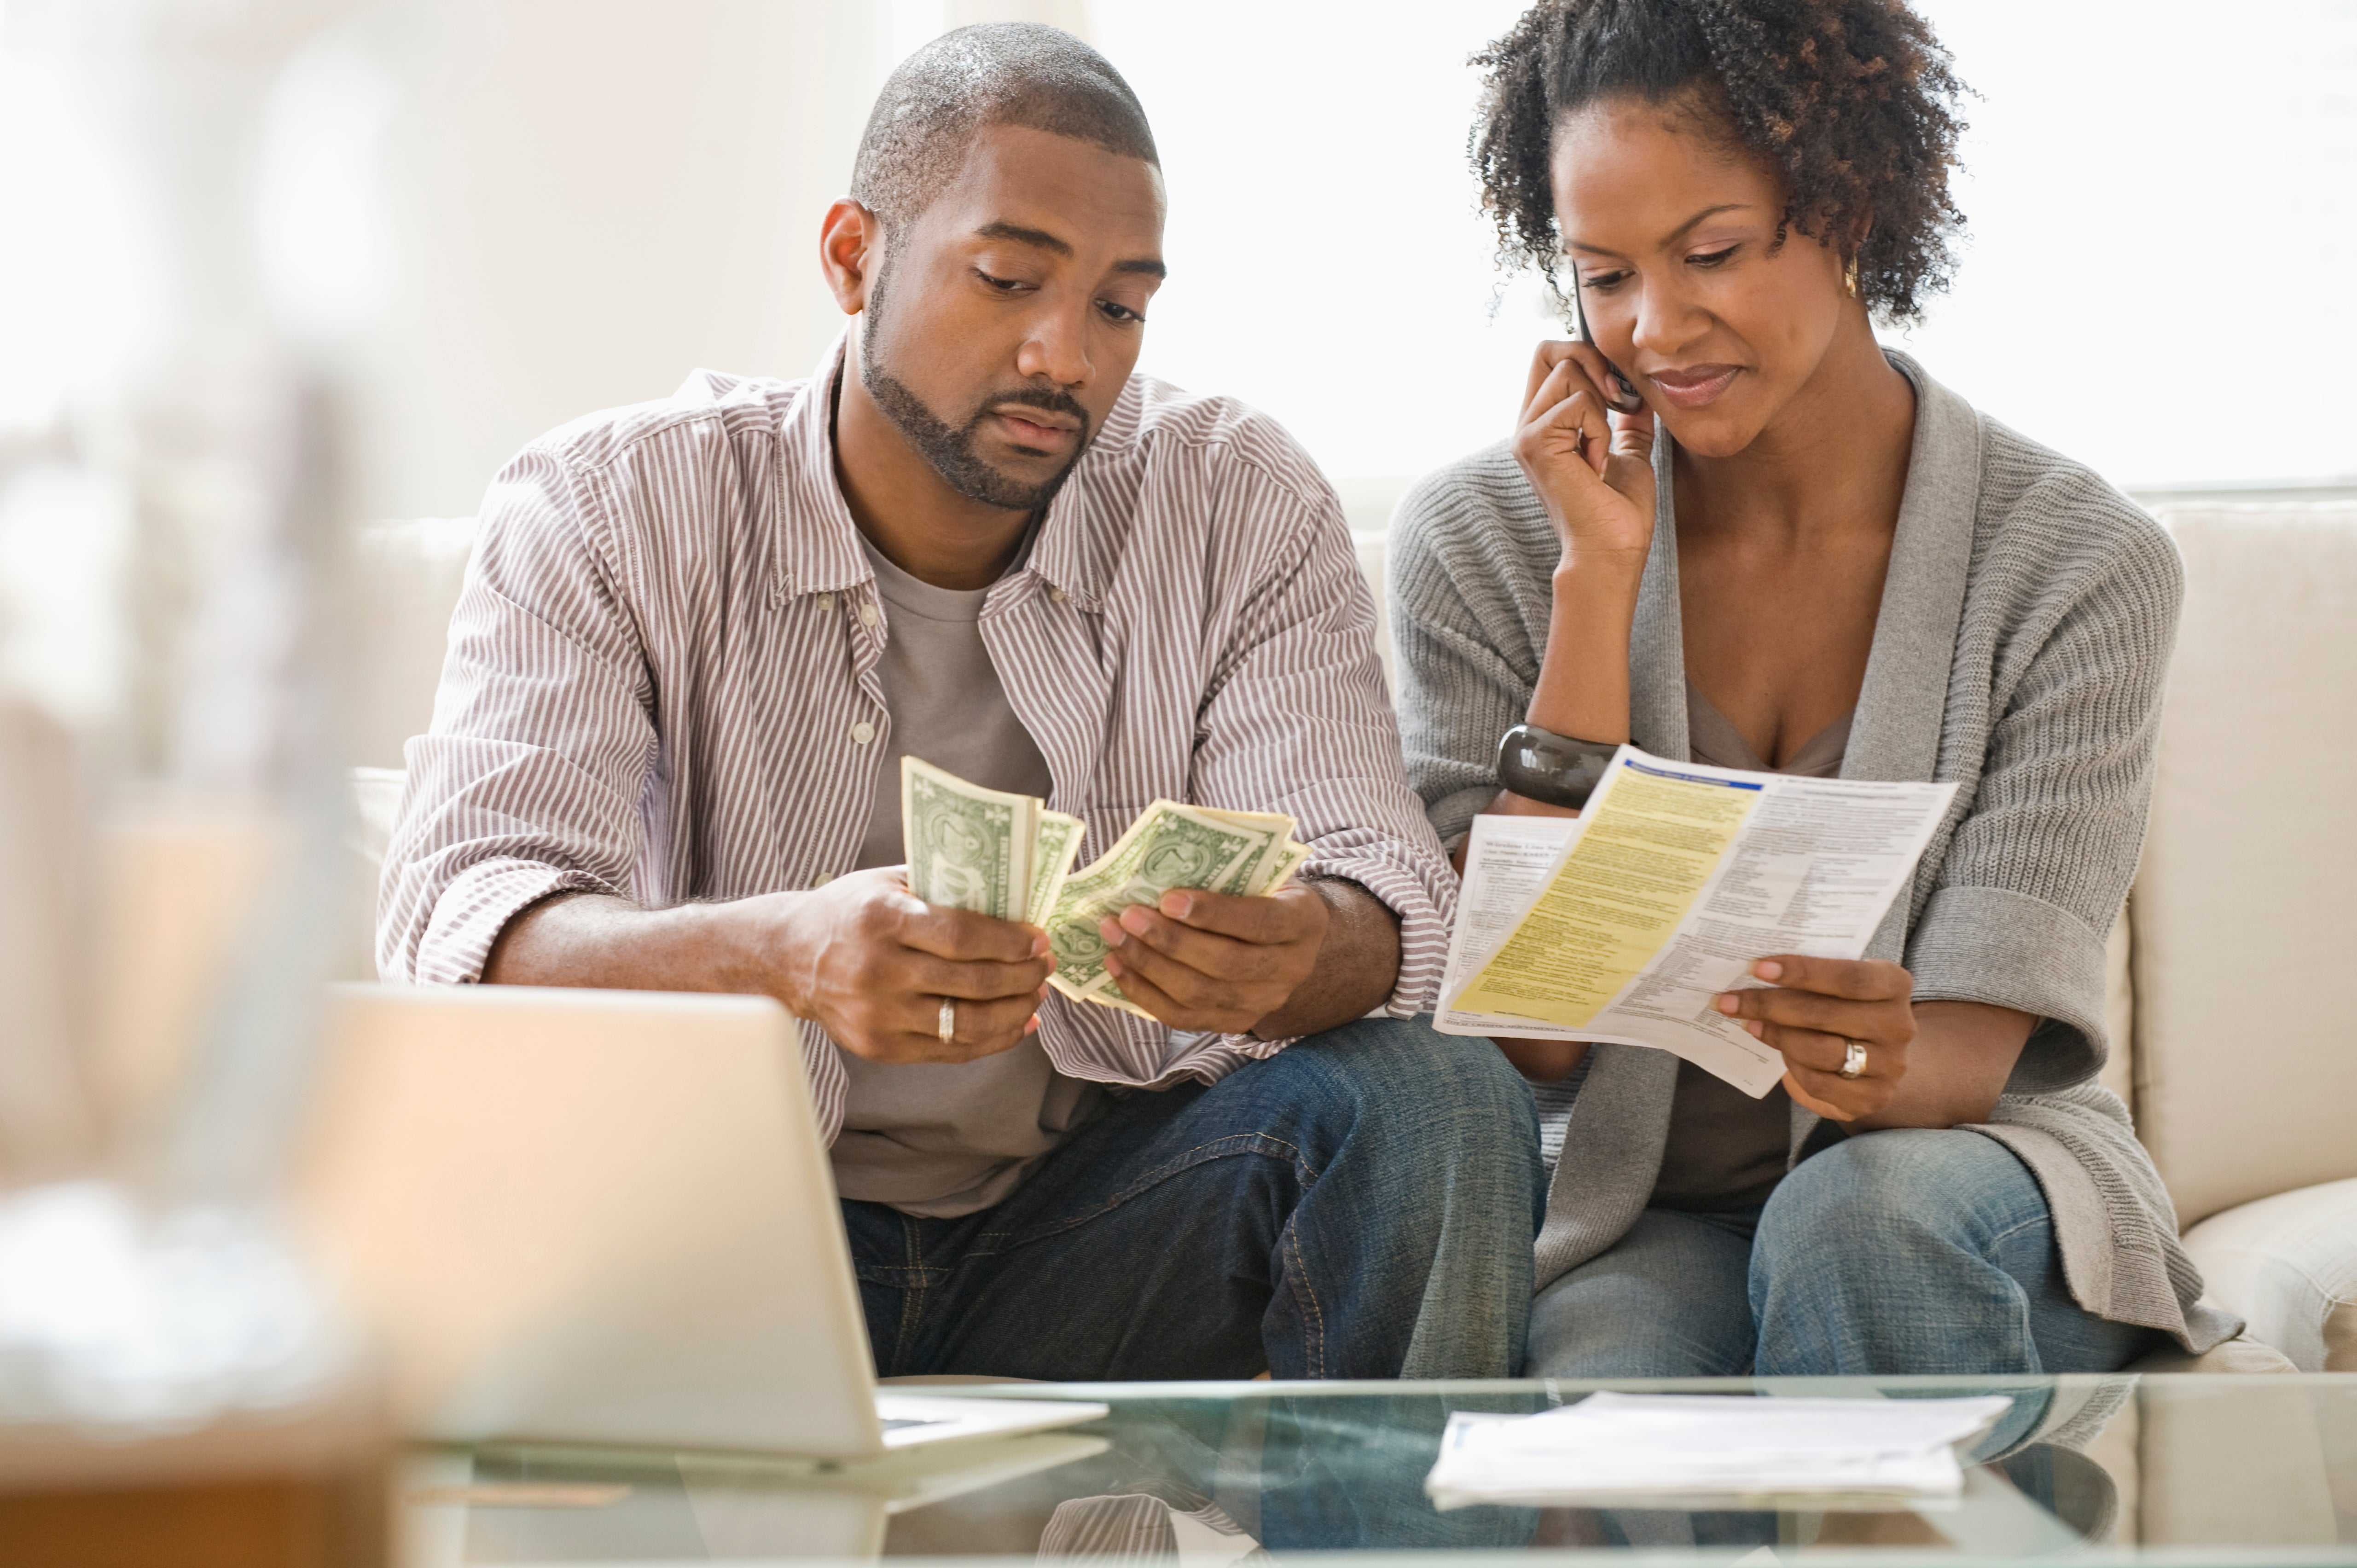 6 Things Having Bad Credit Could Ruin For You
